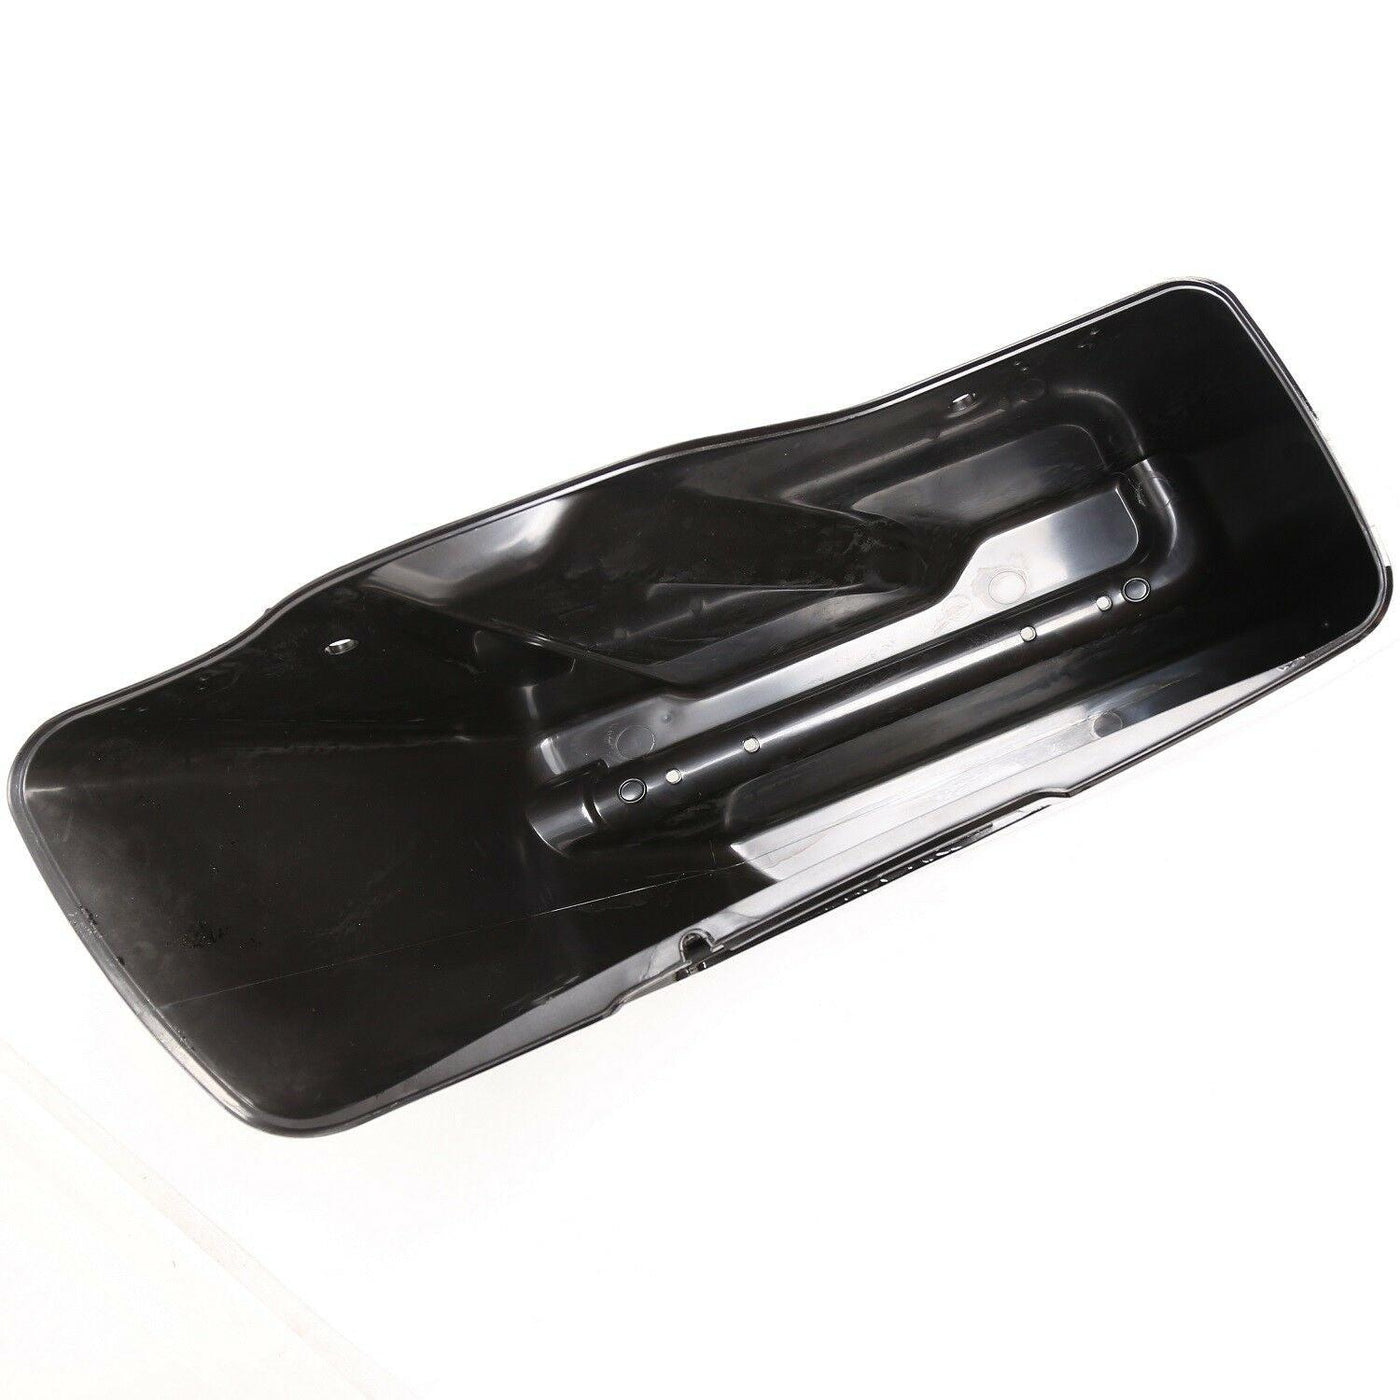 Painted Black Extended Saddlebags W/O latch For 14-21 Harley Davidson Touring - Moto Life Products